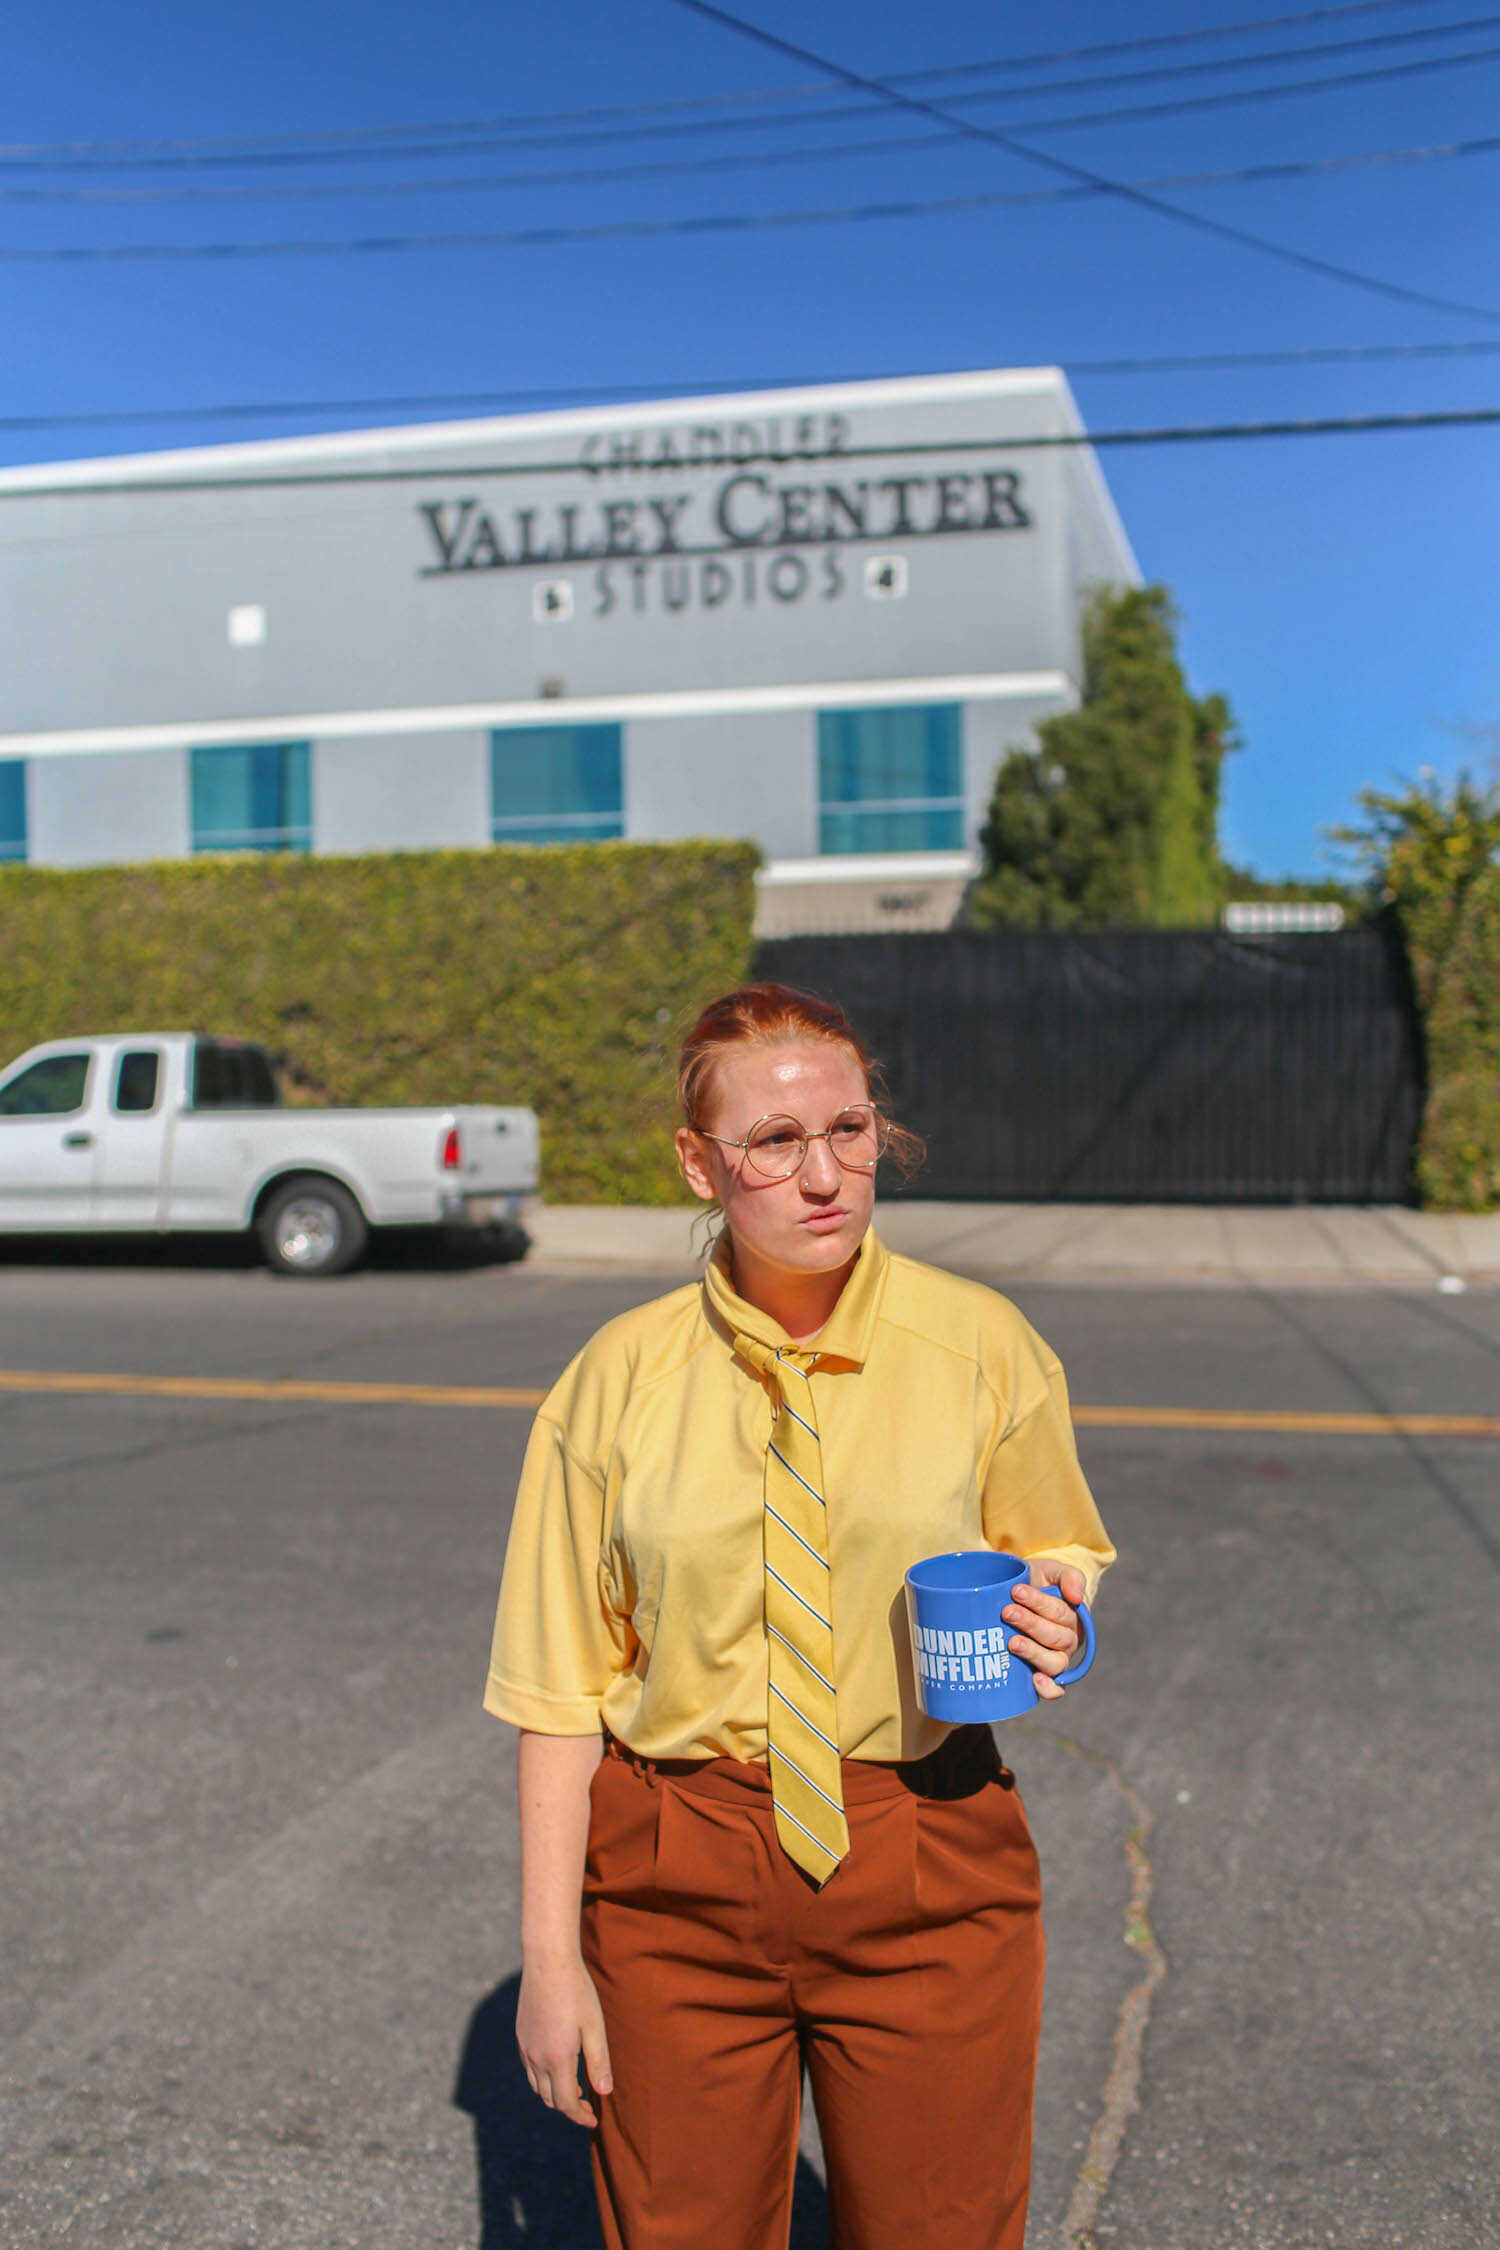 Kara dressed as Dwight Schrute in front of the Dunder Mifflin office building in Panorama City.